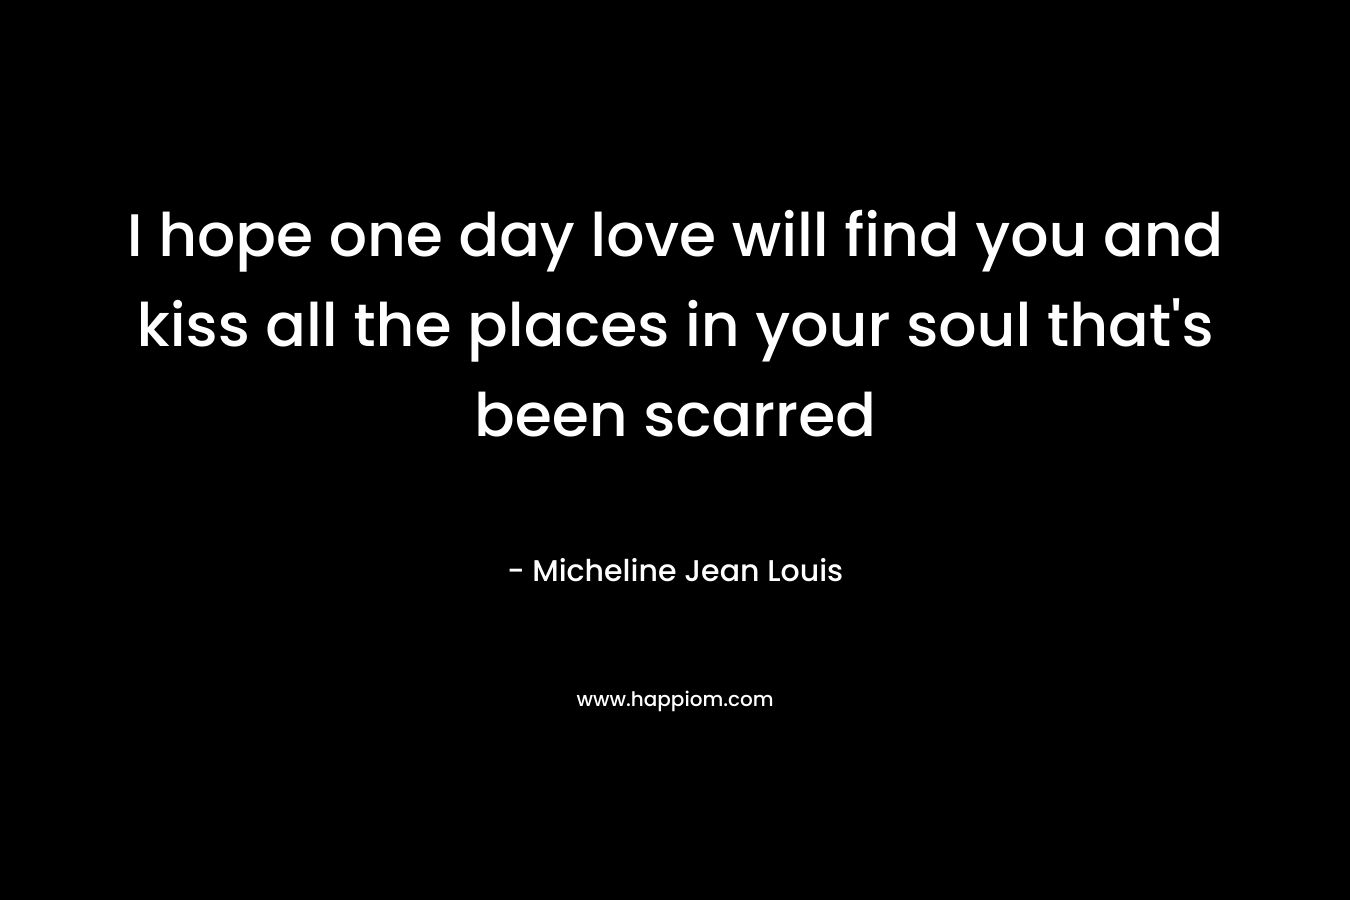 I hope one day love will find you and kiss all the places in your soul that’s been scarred – Micheline Jean Louis